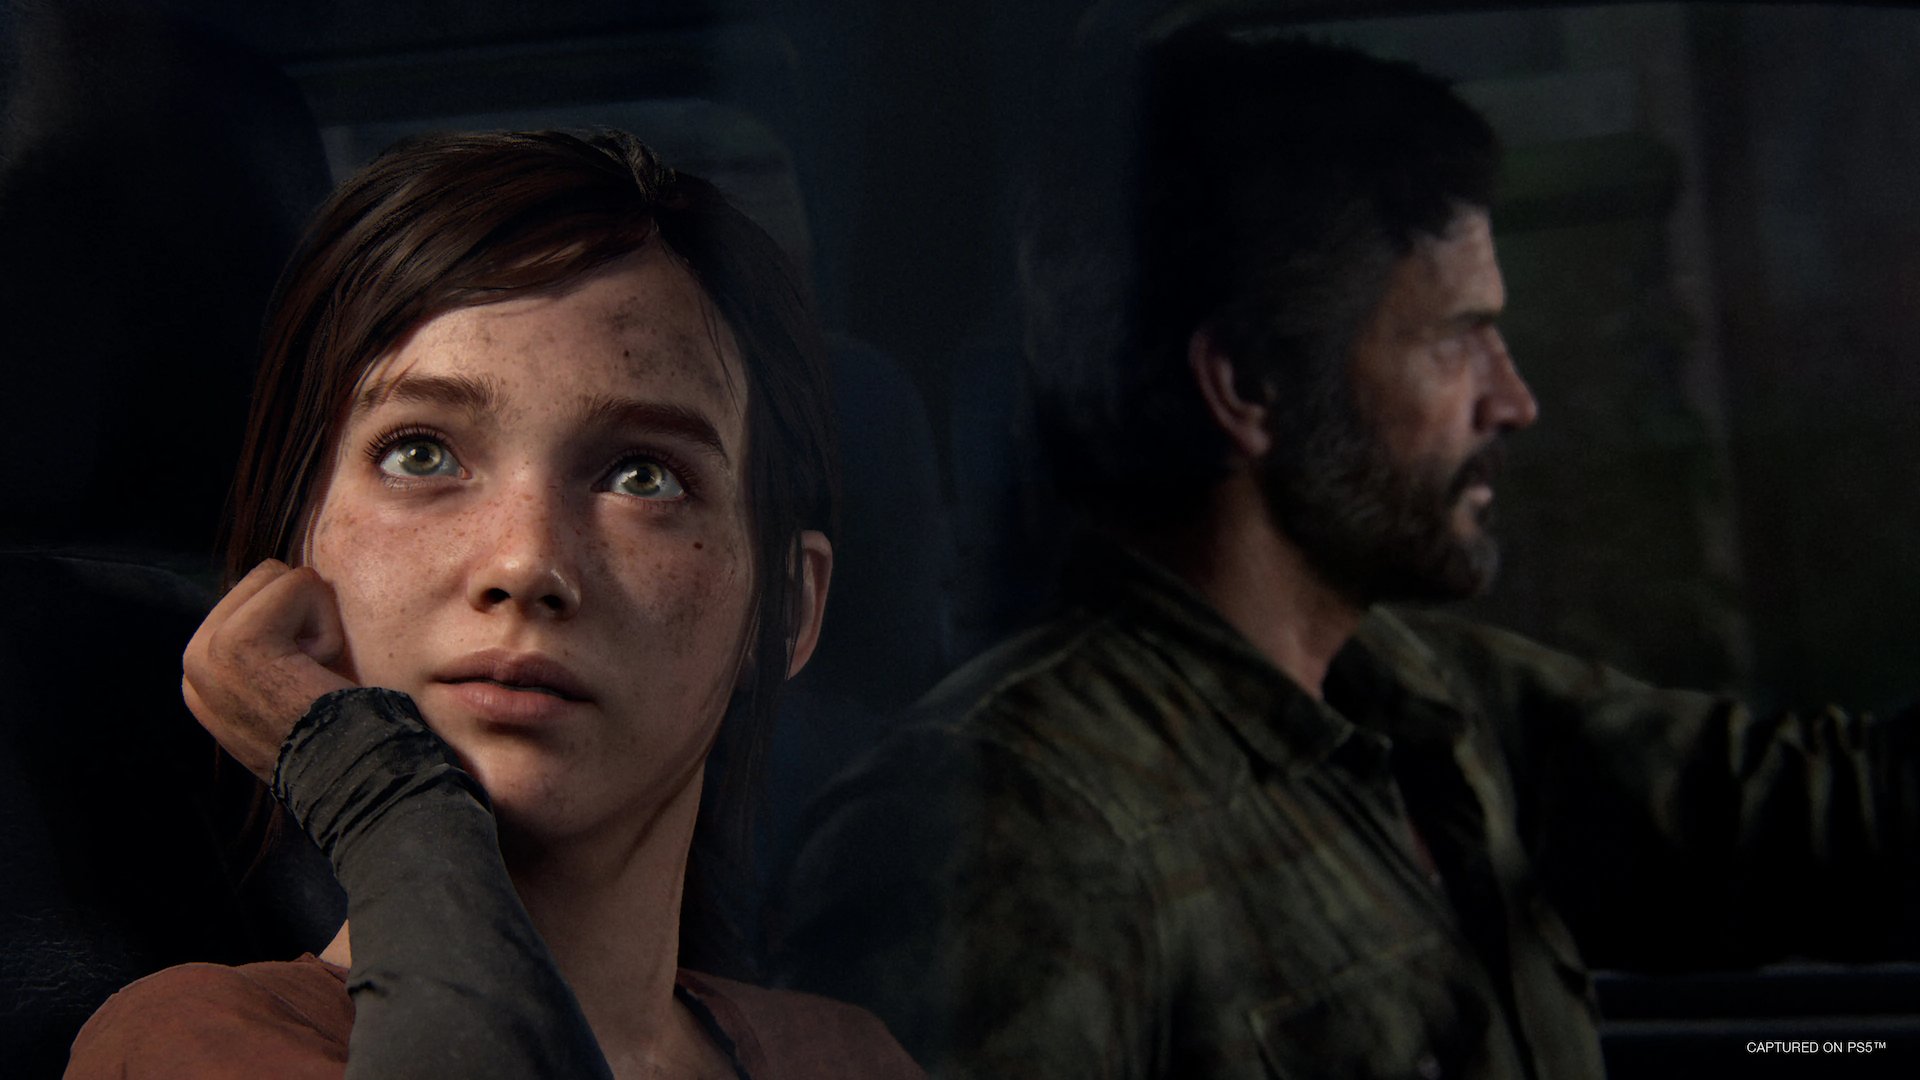 The Last of Us Could Be Steam Deck Verified At Launch